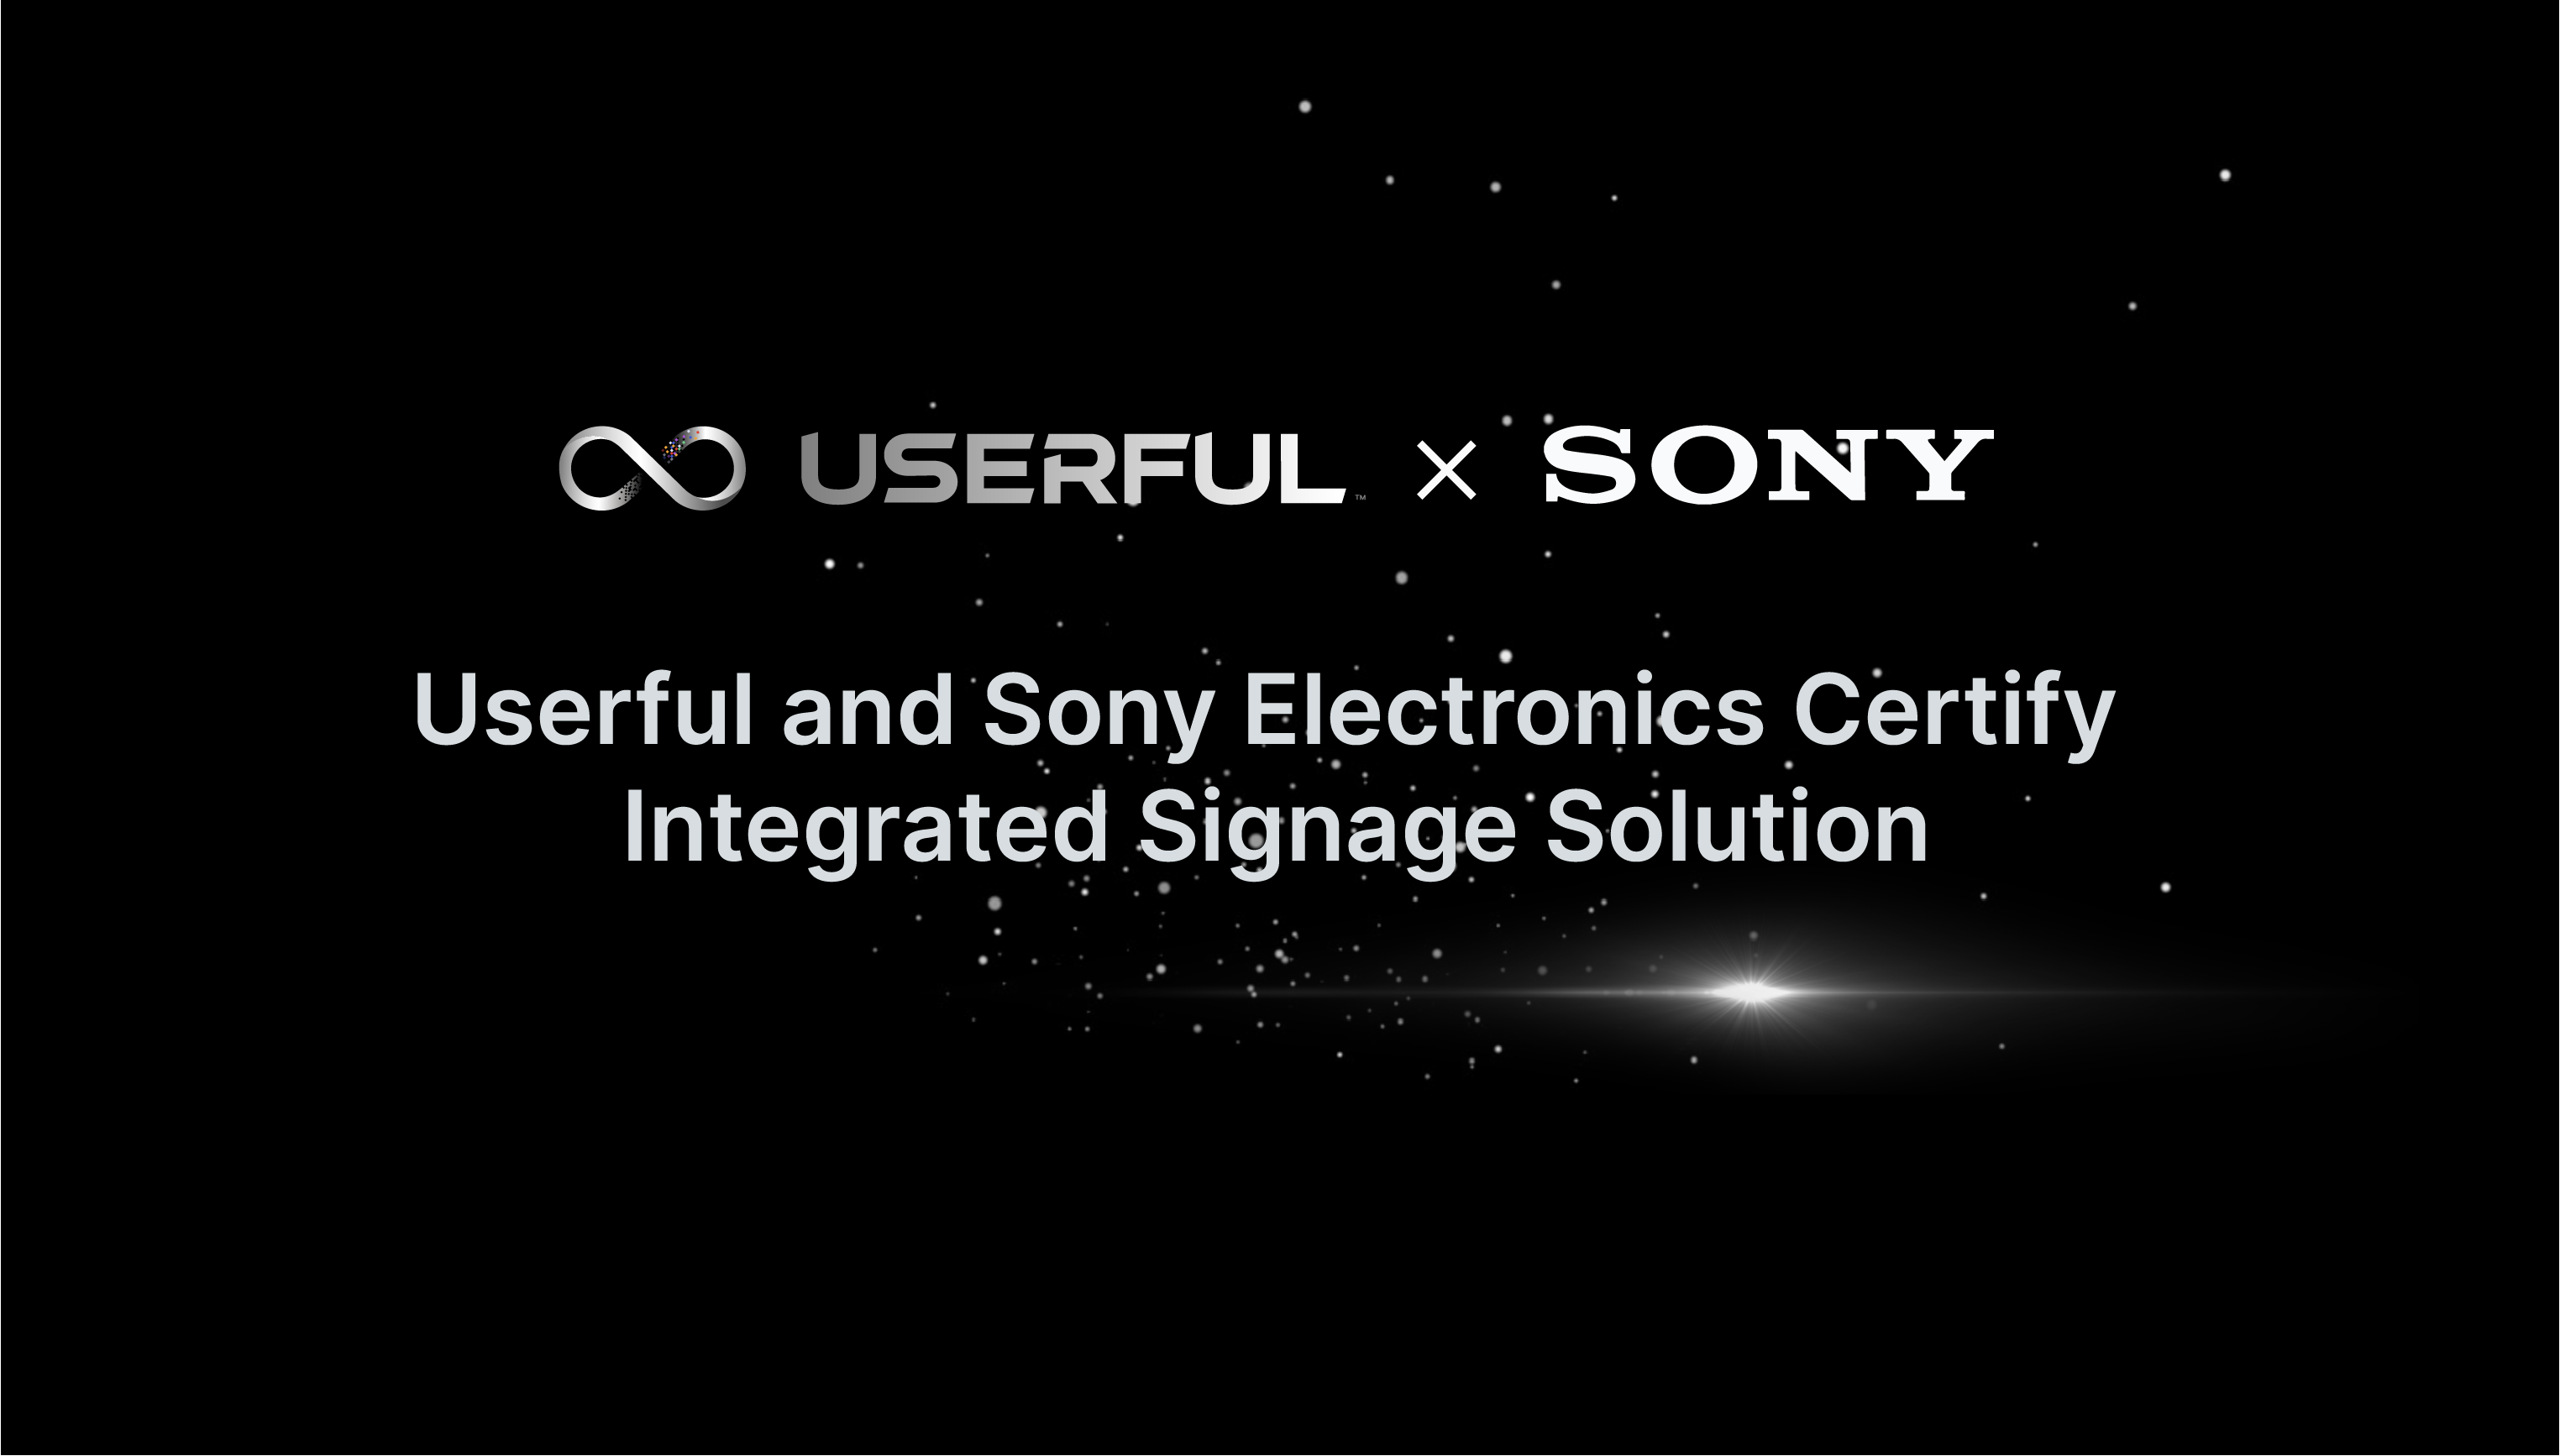 Userful and Sony Electronics Certify Integrated Signage Solution